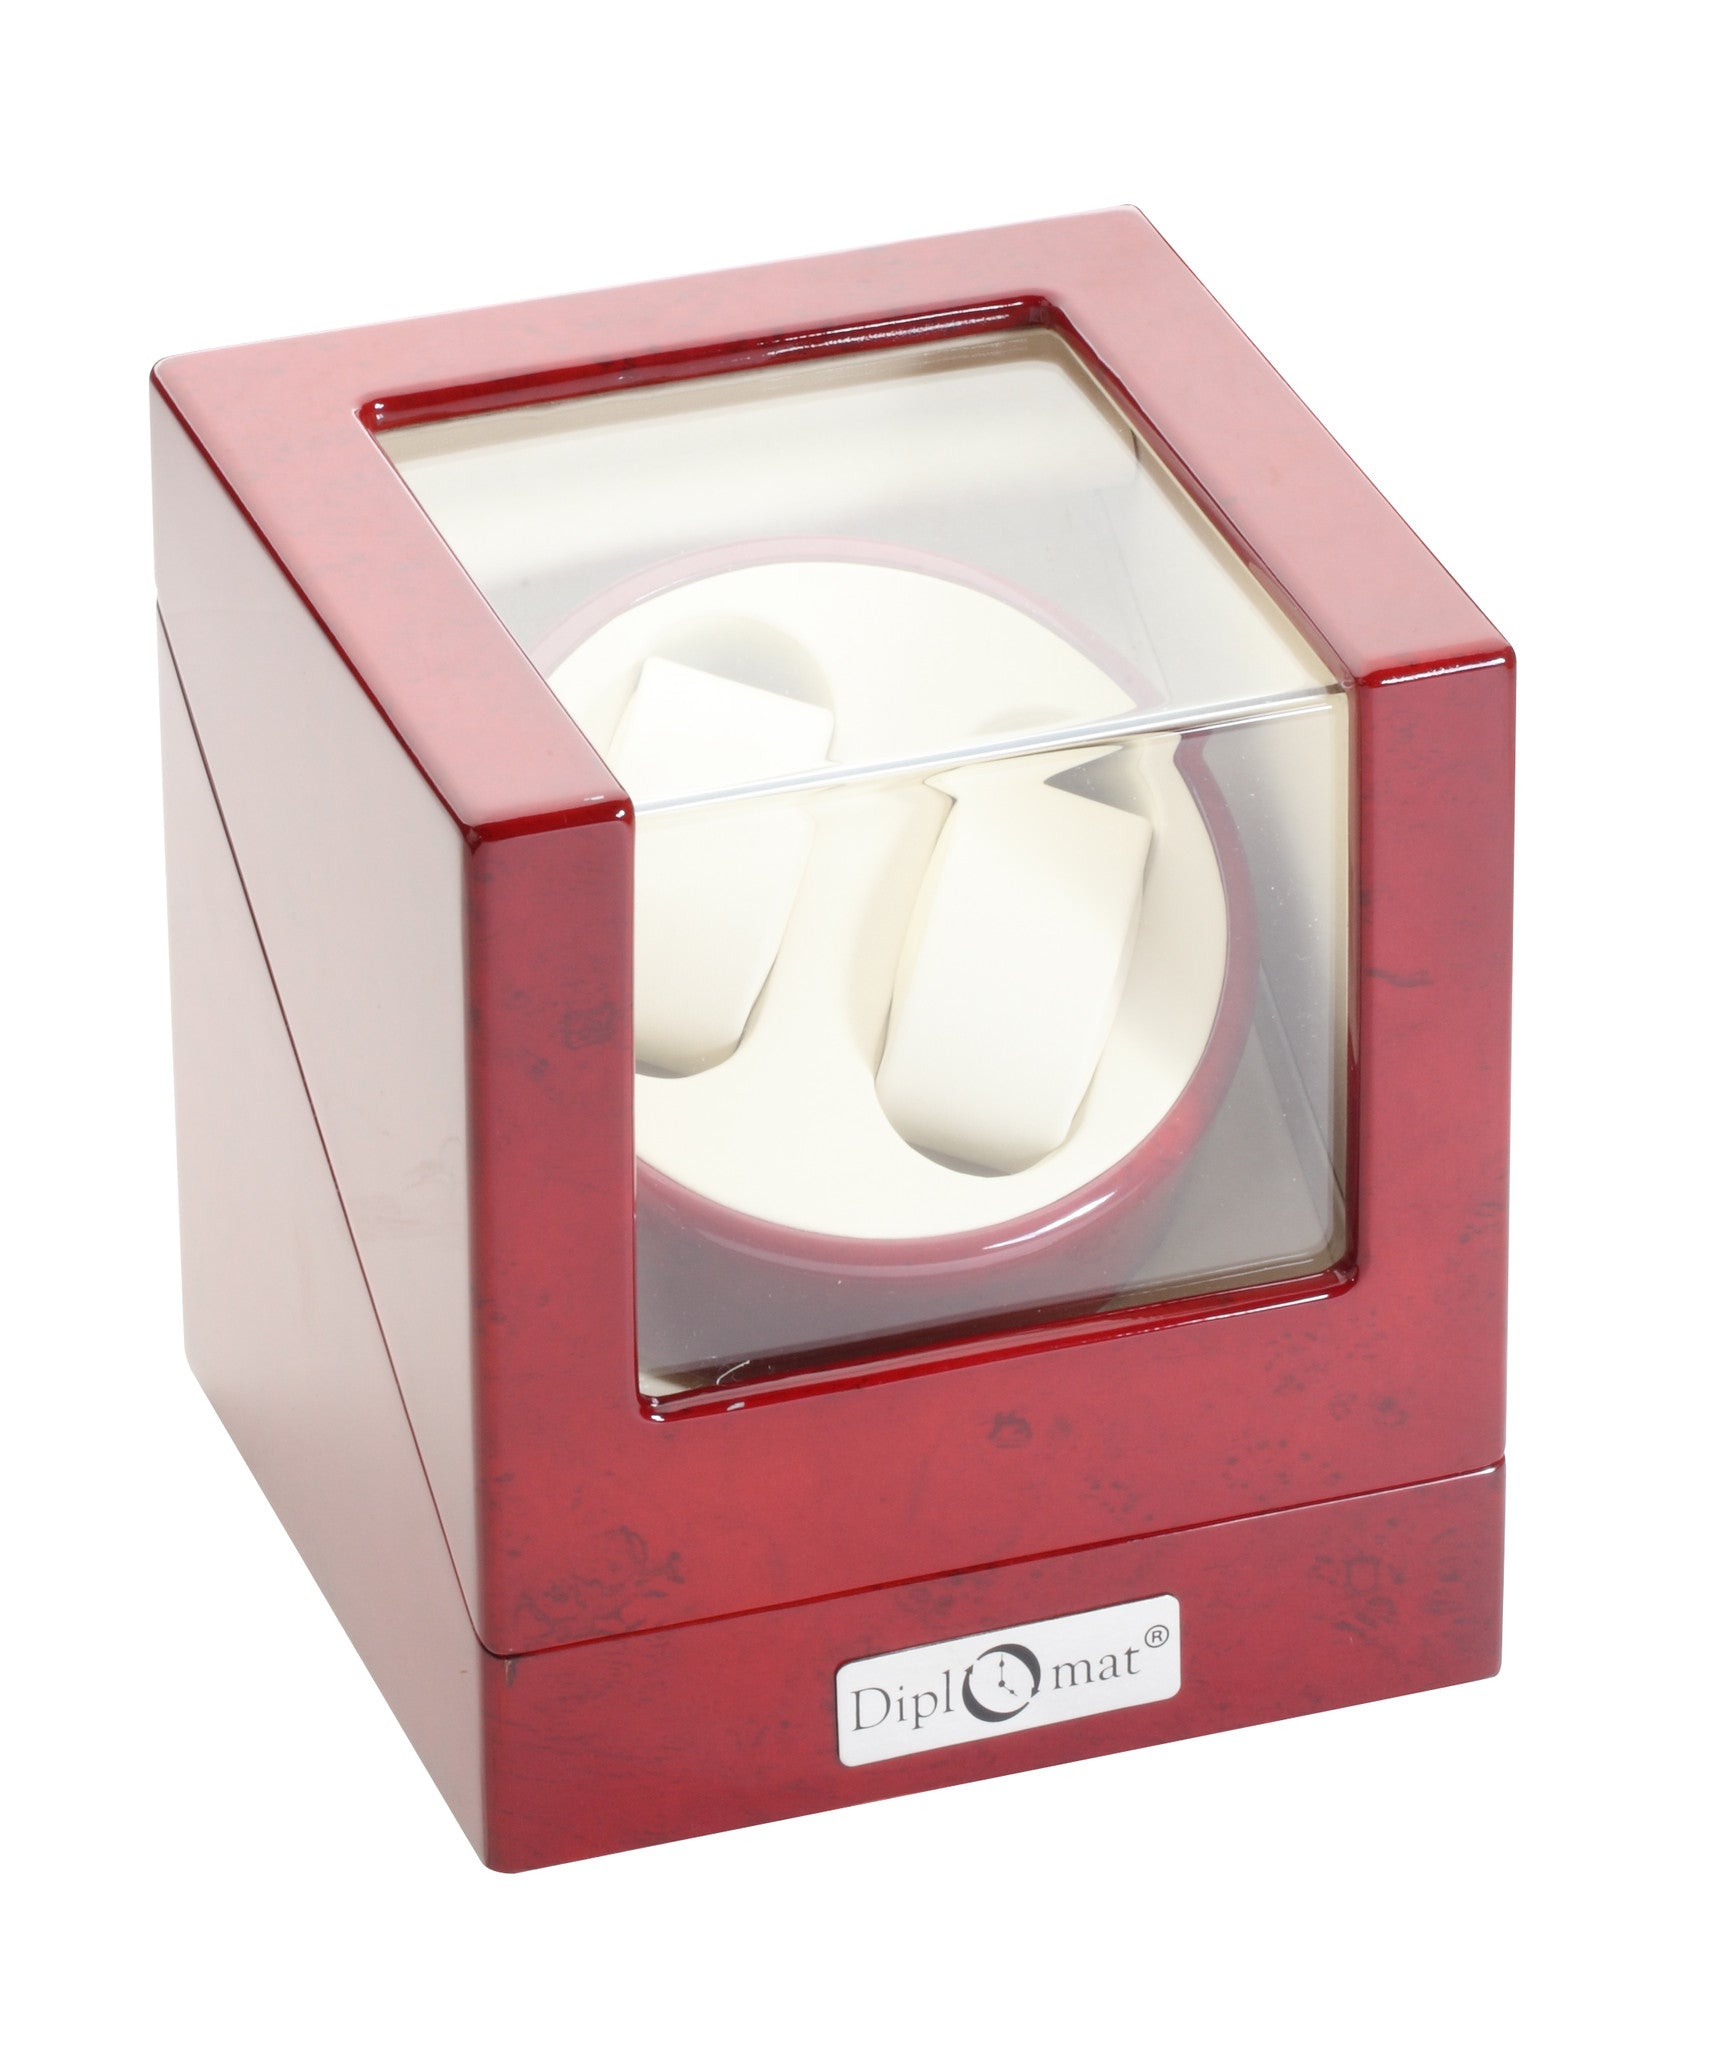 Diplomat Rosewood Double Watch Winder | Watch Box Co.